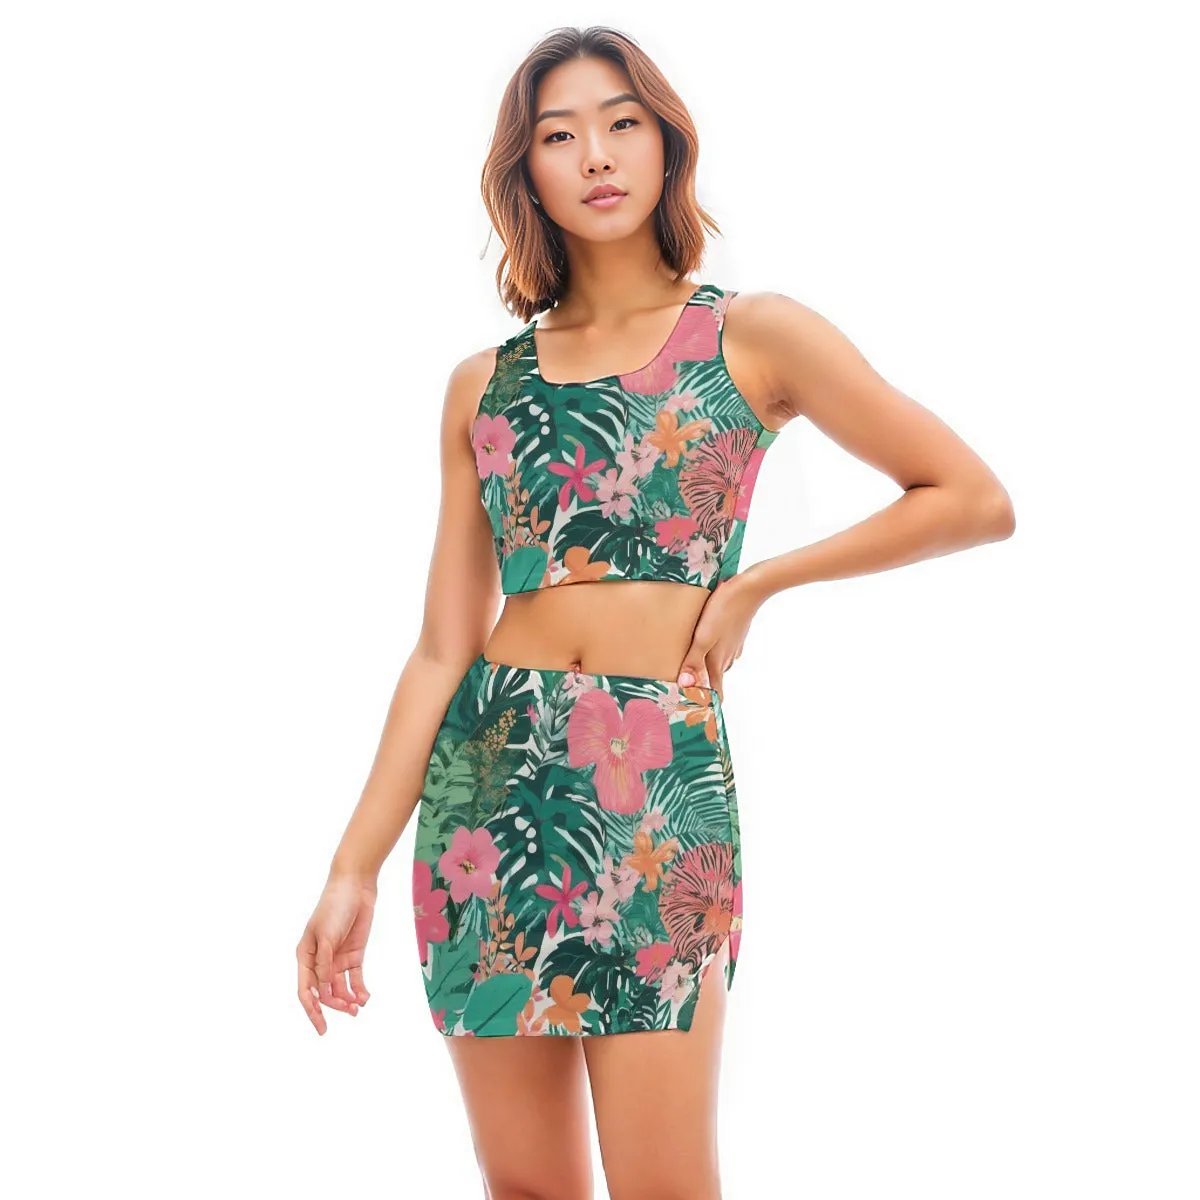 Jungle Voyage Women's Camisole And Hip Skirt Outfit Set